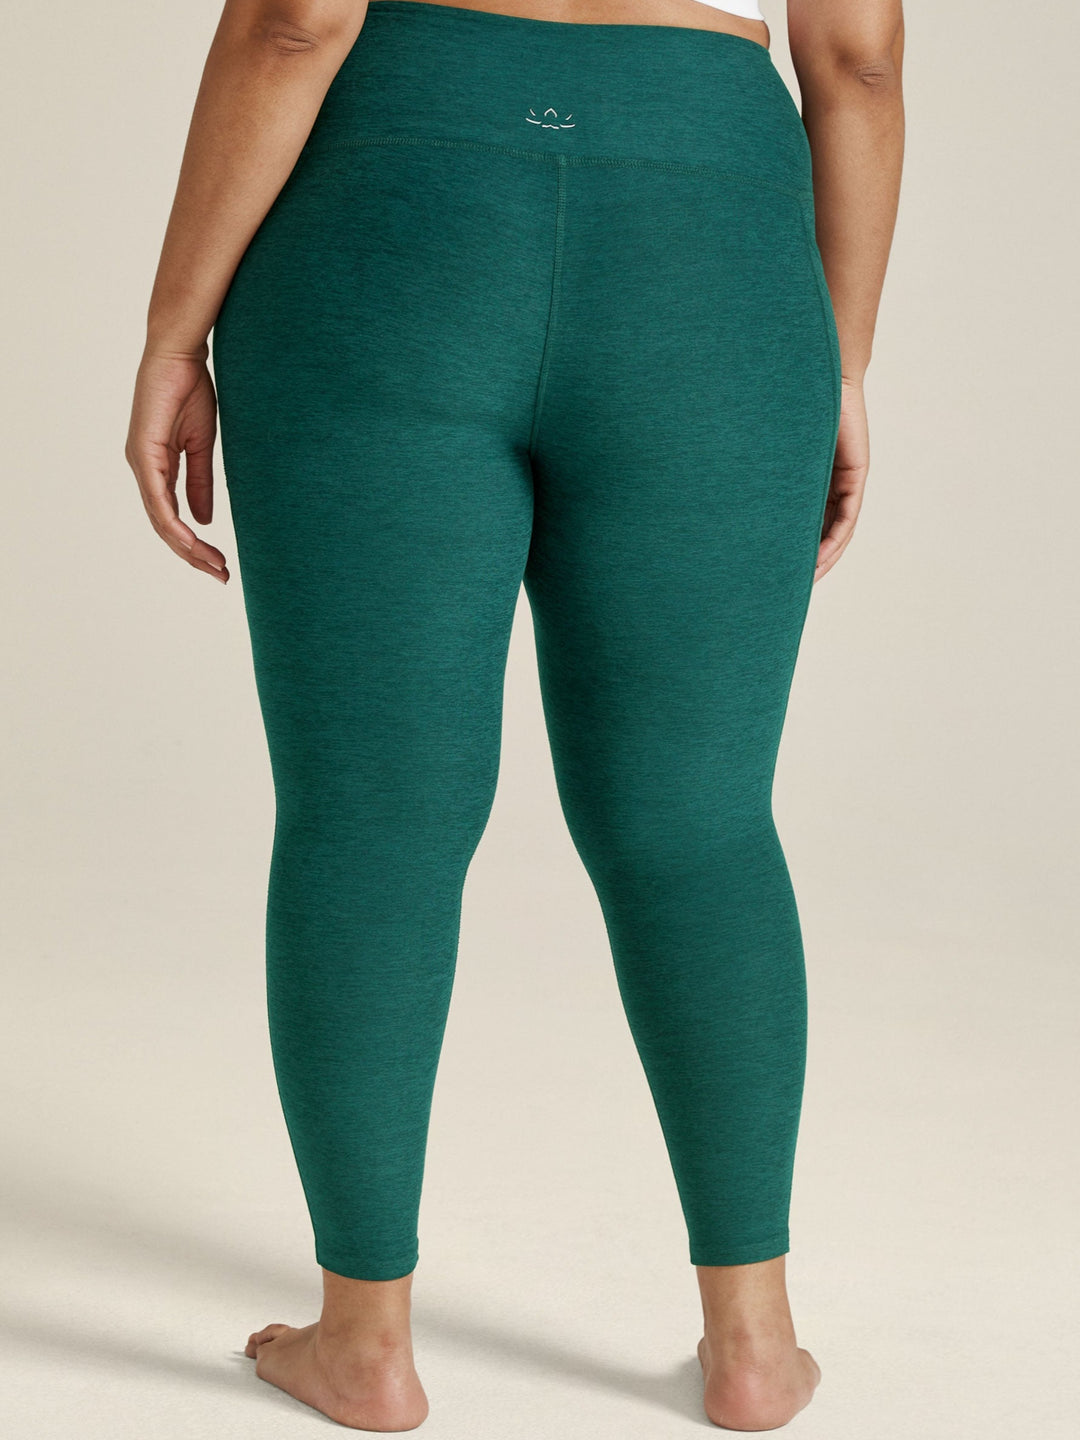 New Polygon Yoga Pants for Women, High Waisted Leggings with